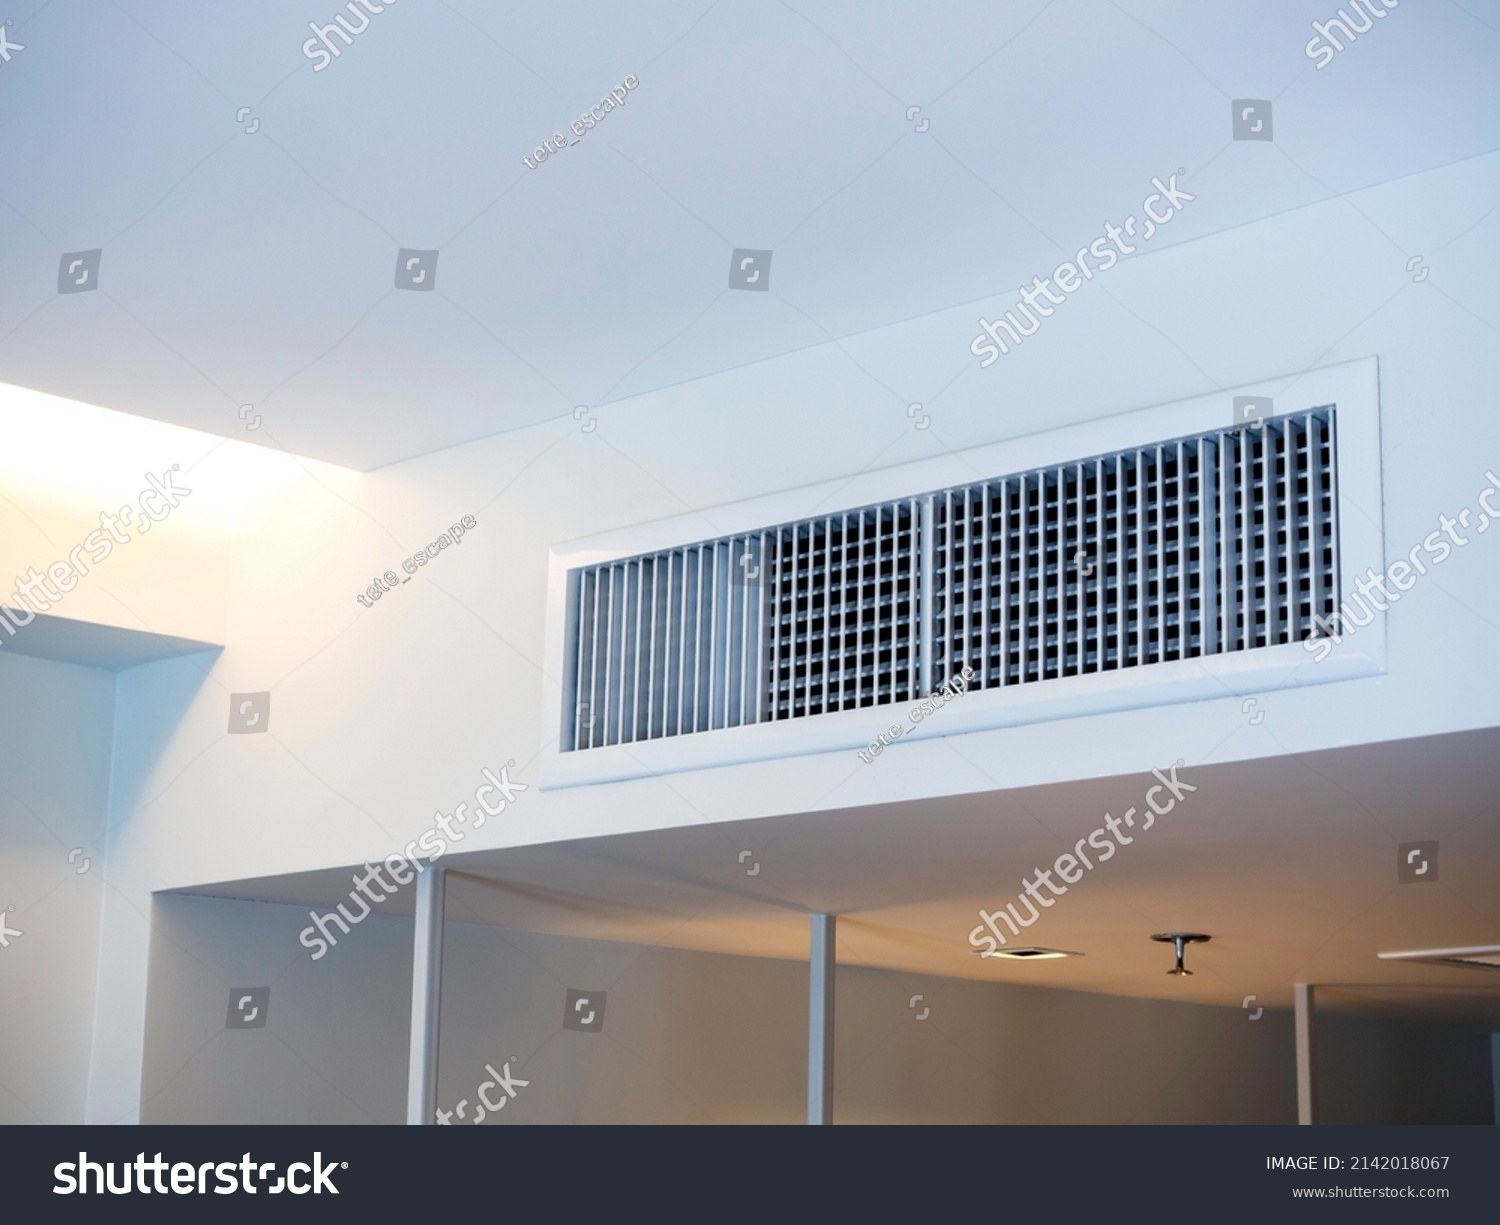 Air conditioning wall mounted ventilation system on ceiling in the white hotel room. Hotel room air ventilation grill on the wall. #2142018067